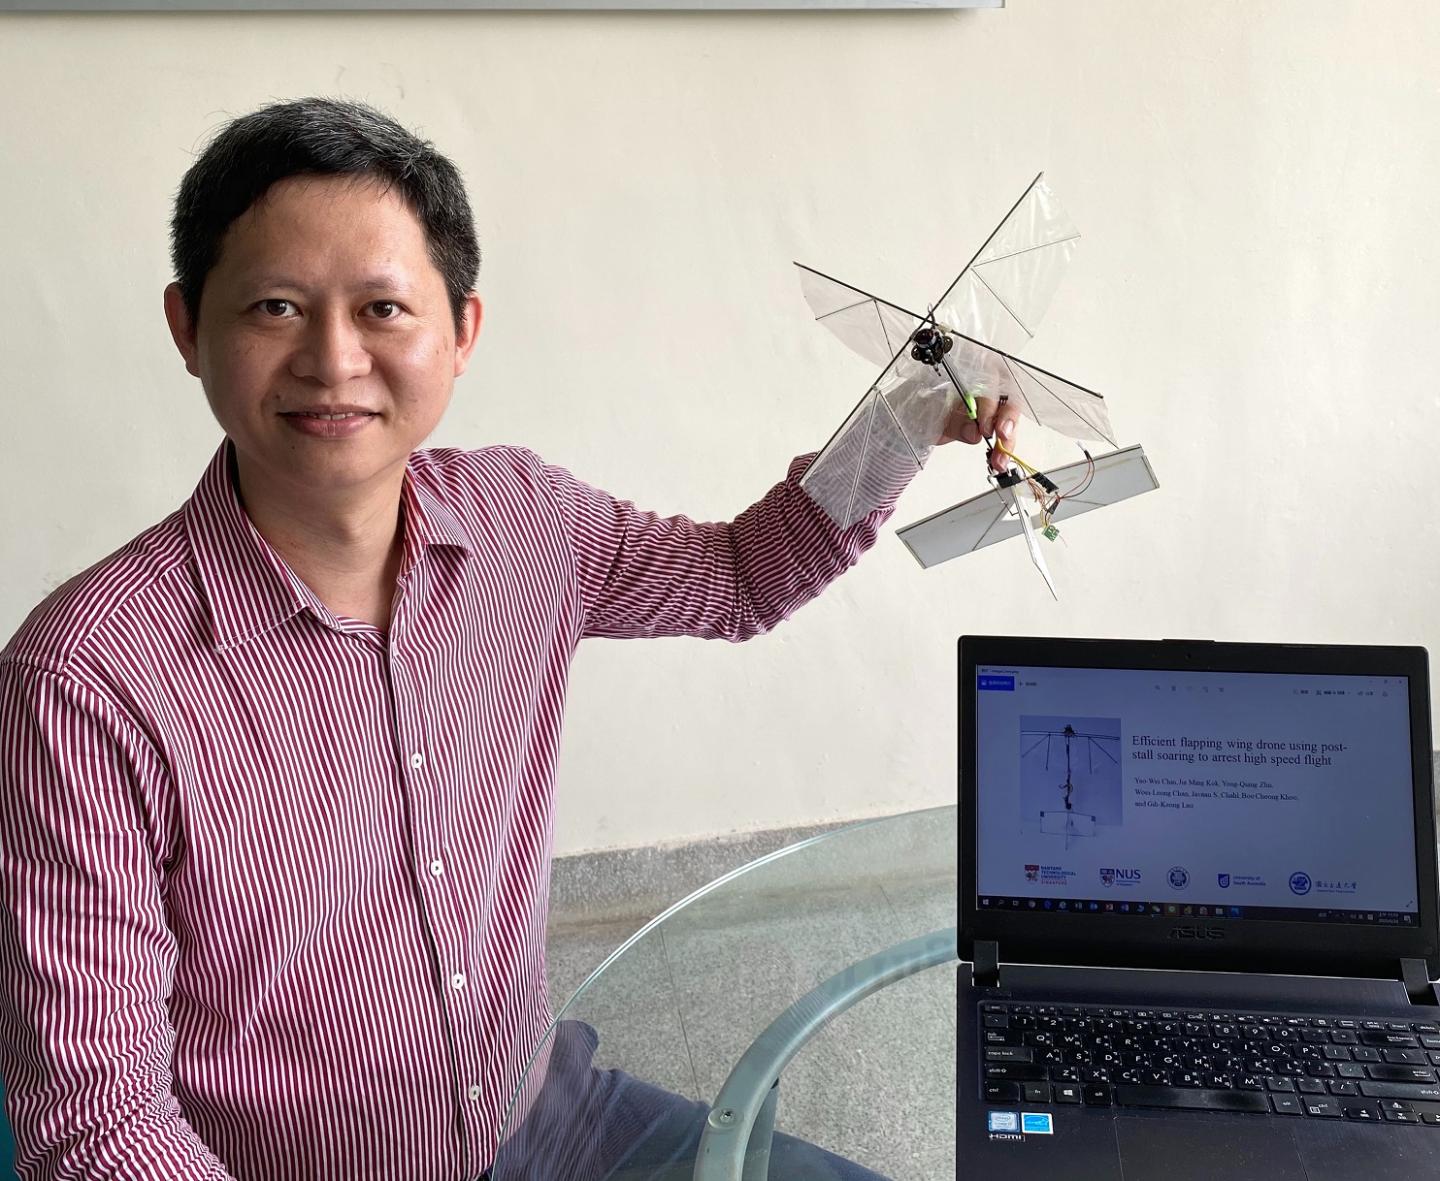 Mechanical engineer associate professor Gih-Keong Lau pictured with the drone prototype. Source: National Chiao Tung University